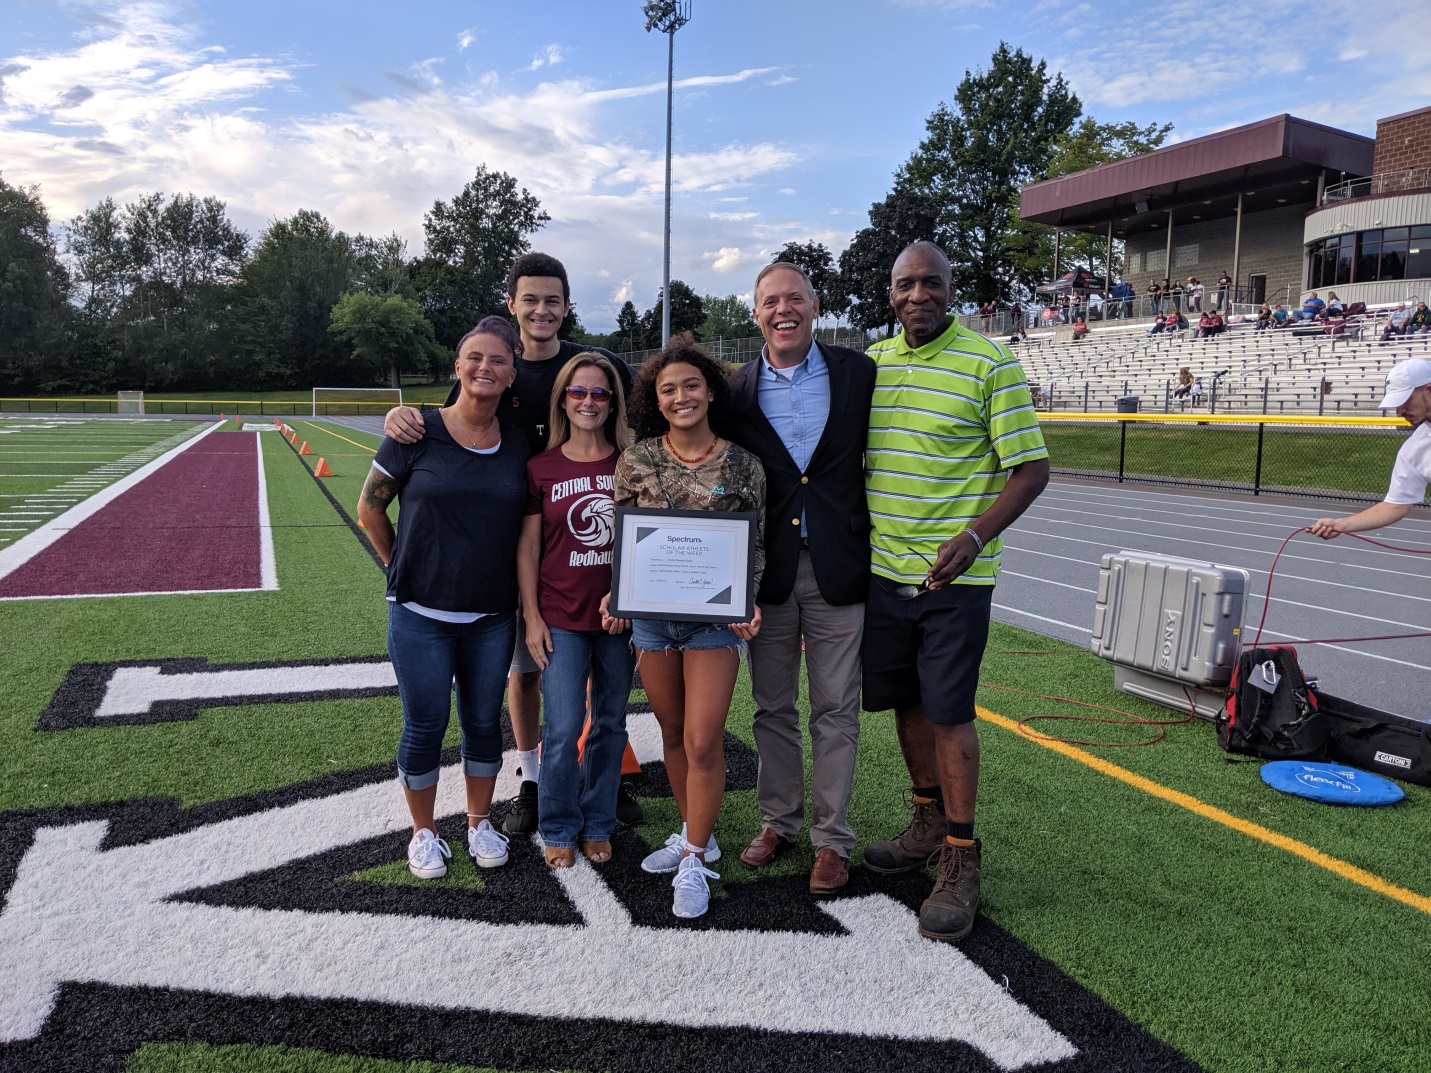 Assemblyman Will Barclay (R,C,I,Ref—Pulaski) recently presented Central Square’s Jordan Ravenel-Shuler with a Spetrum News Scholar-Athlete Scholarship Award.  Also pictured is the Central Sq